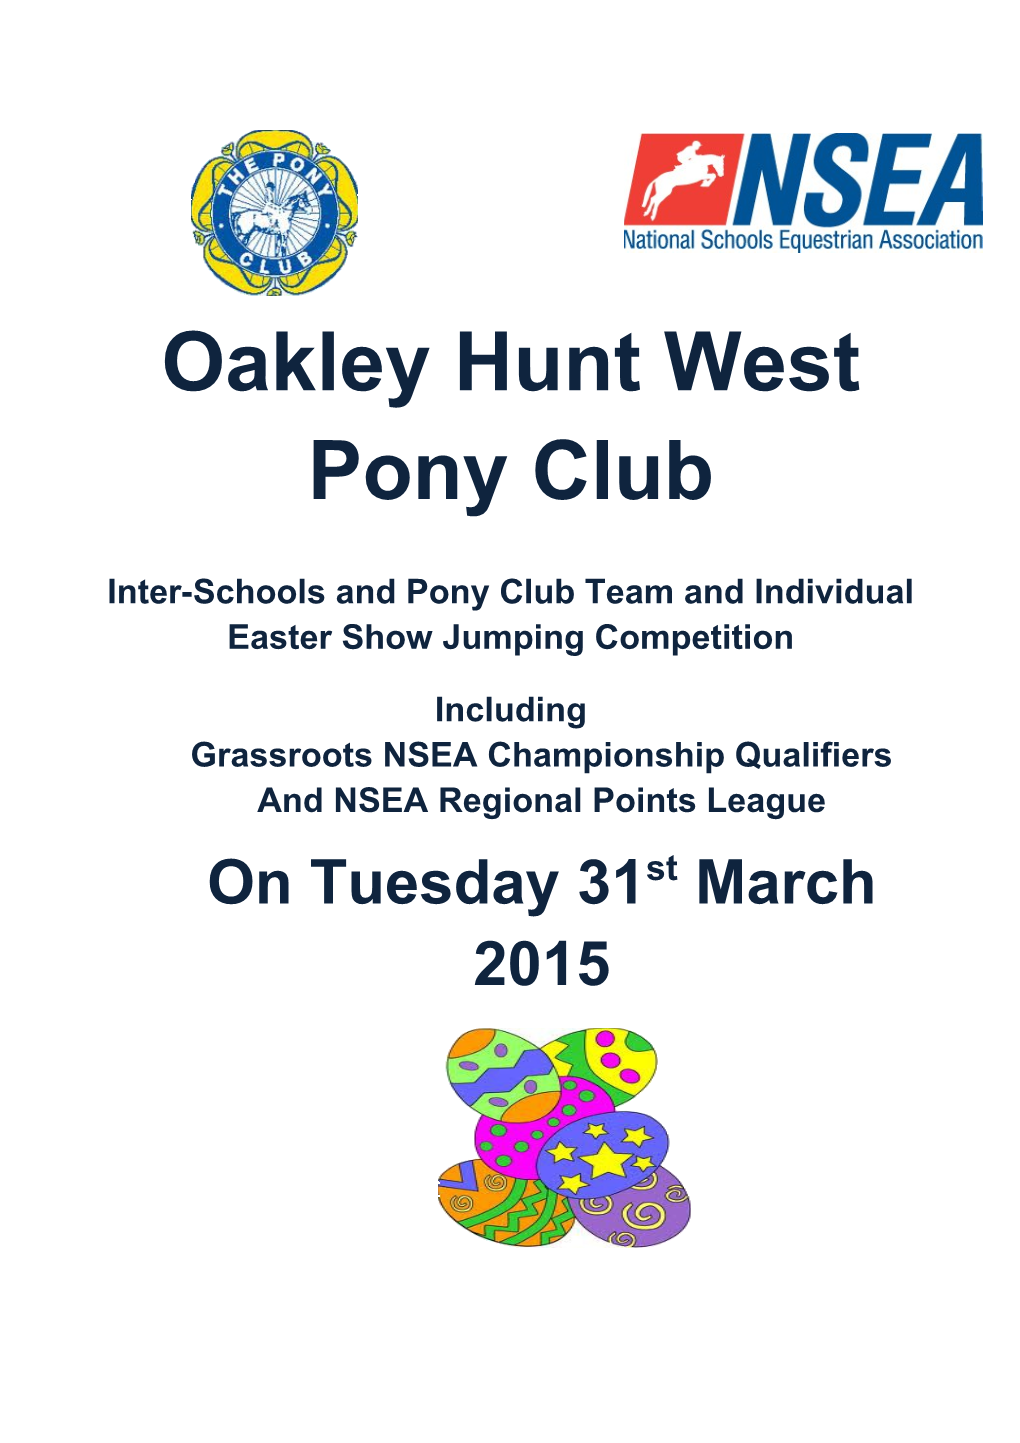 Inter-Schools and Pony Club Team and Individual